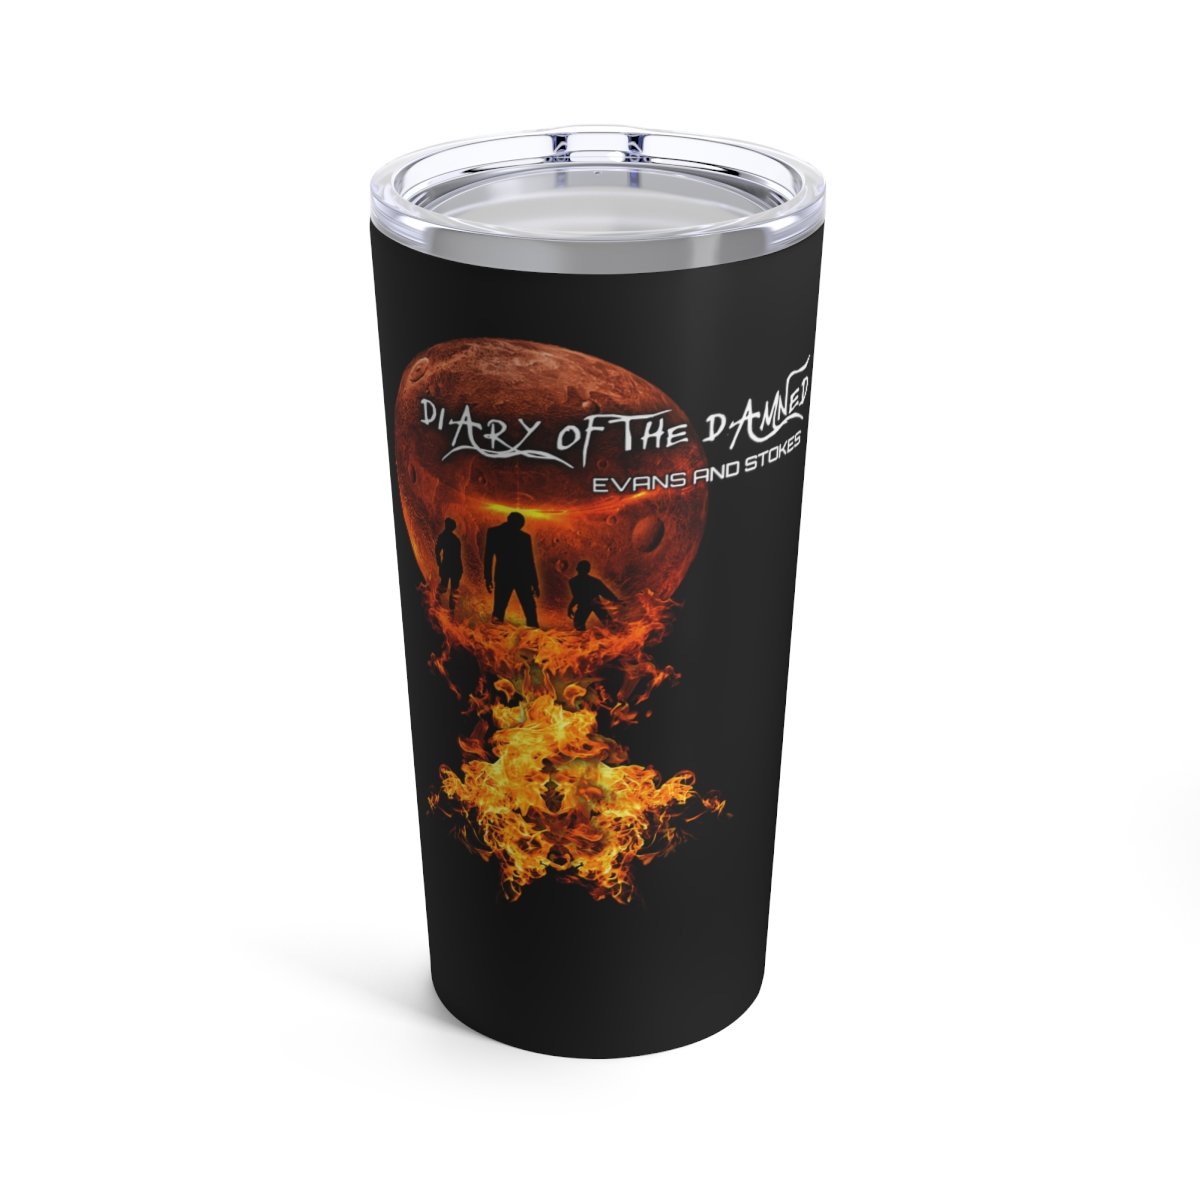 Evans and Stokes – Diary of the Damned 20oz Stainless Steel Tumbler